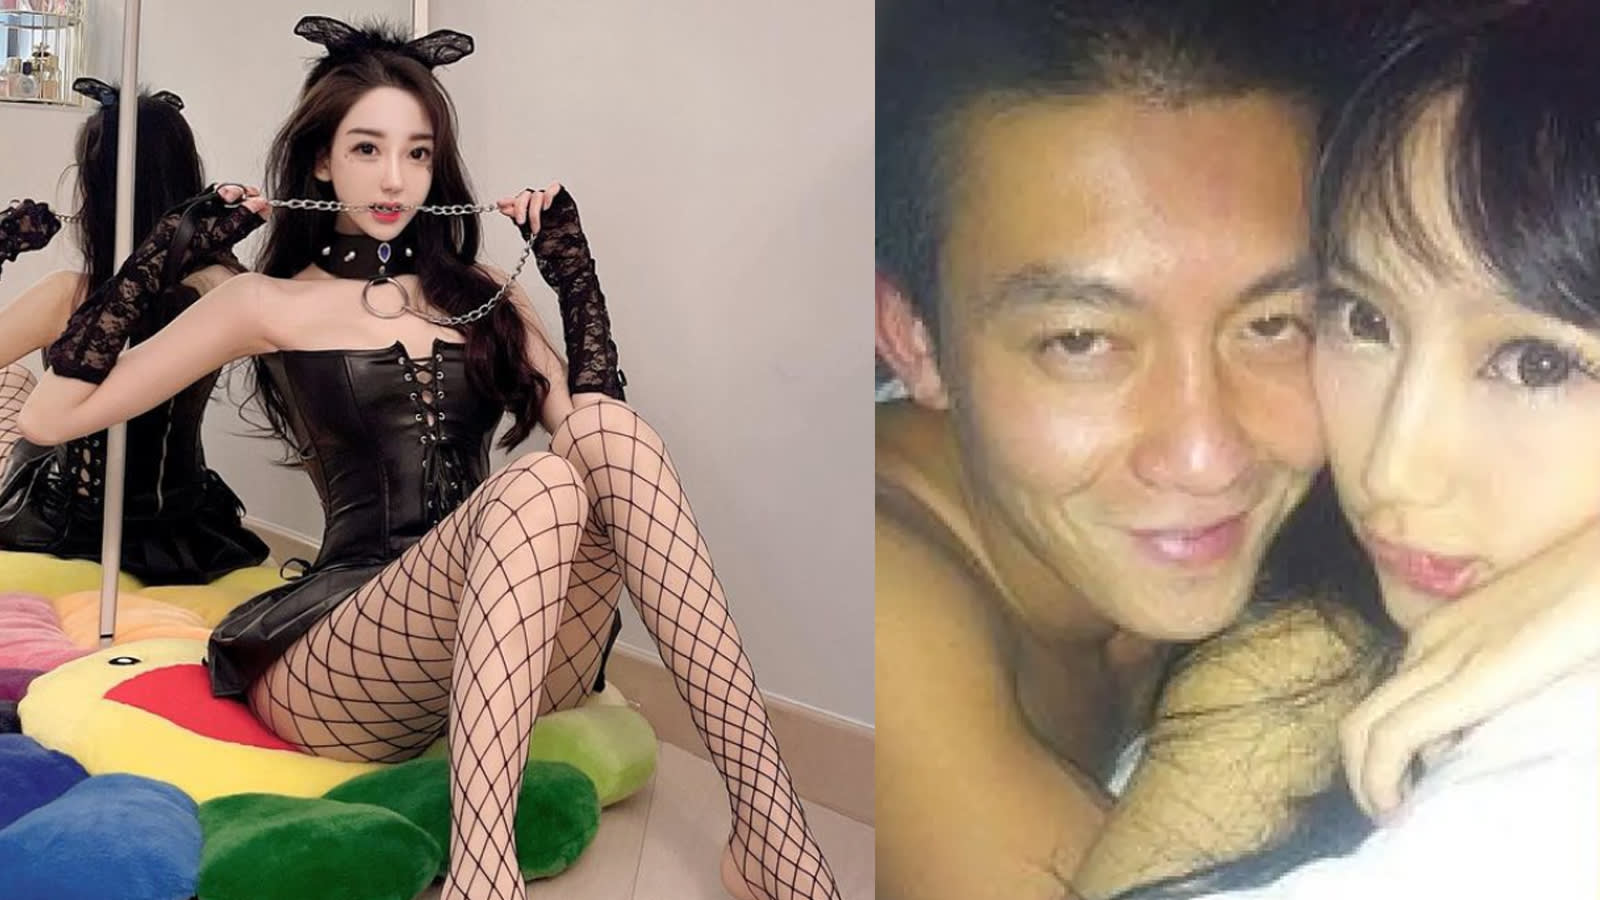 Edison Chens Ex-Girlfriend Cammi Tse Could Get Jailed 7 Years For Promoting Online Casino